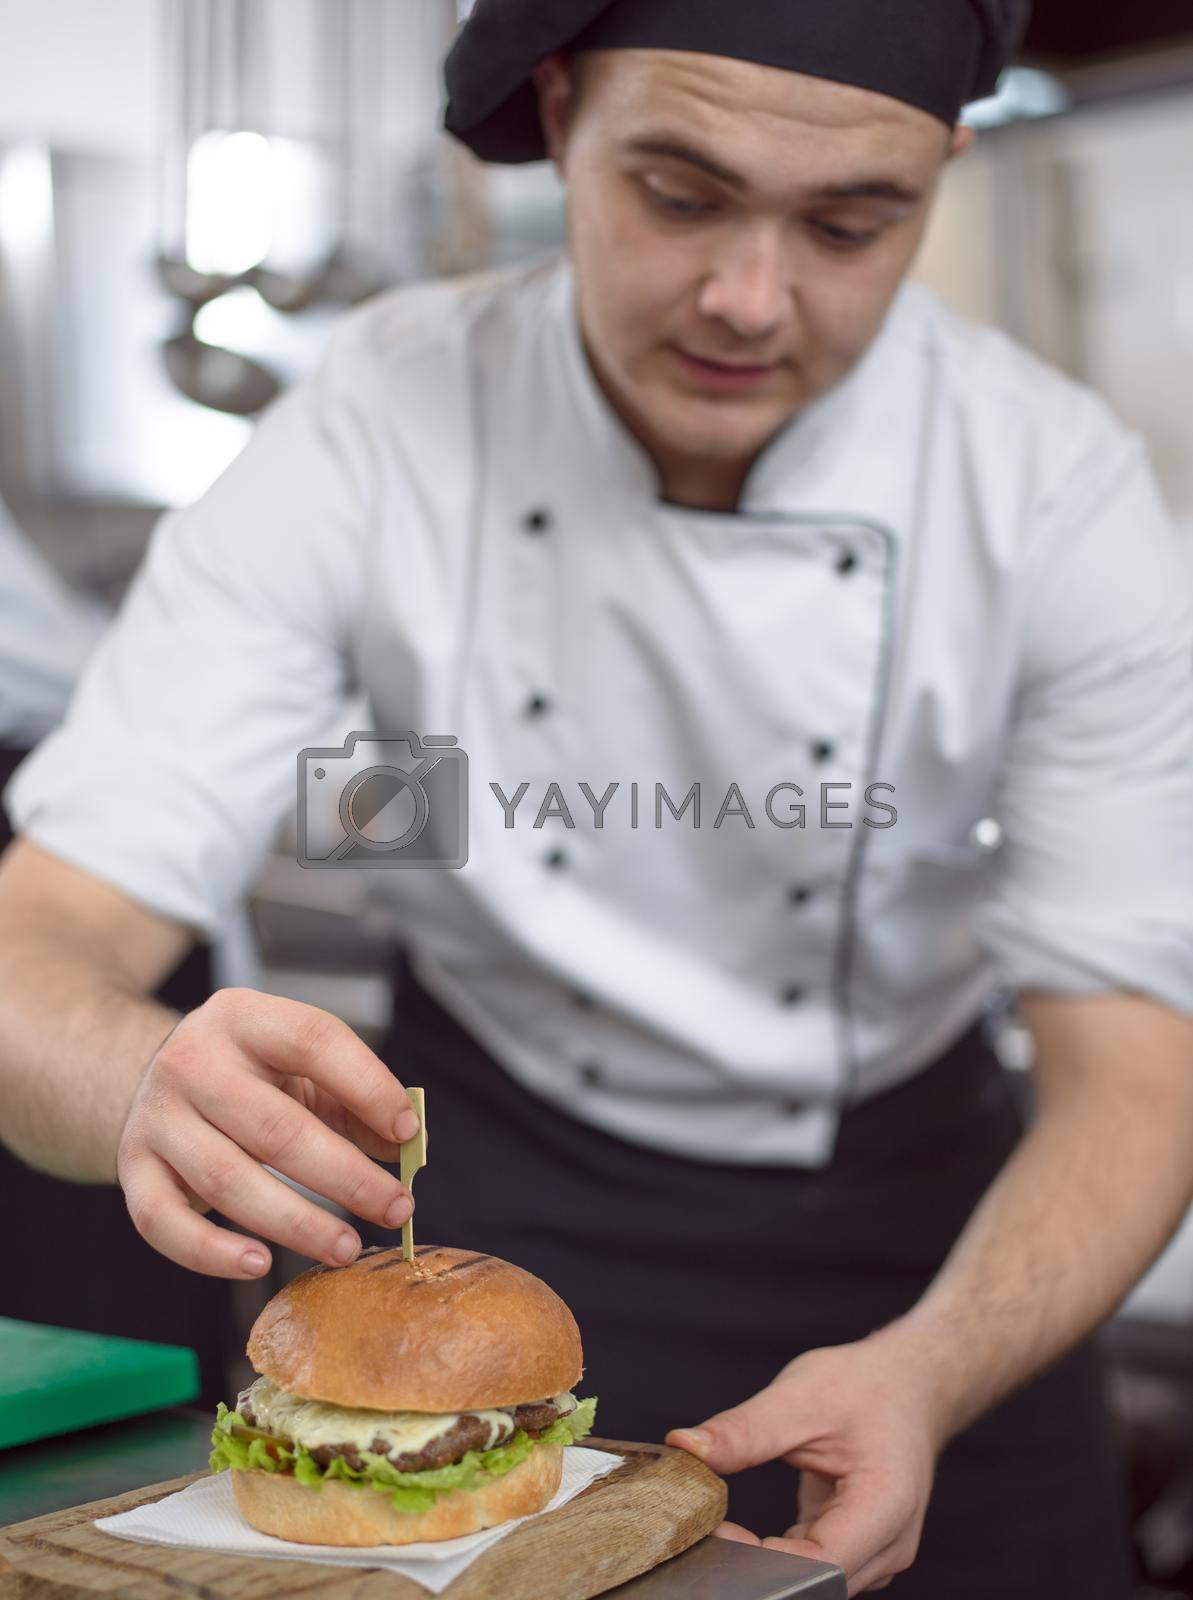 Royalty free image of chef finishing burger by dotshock